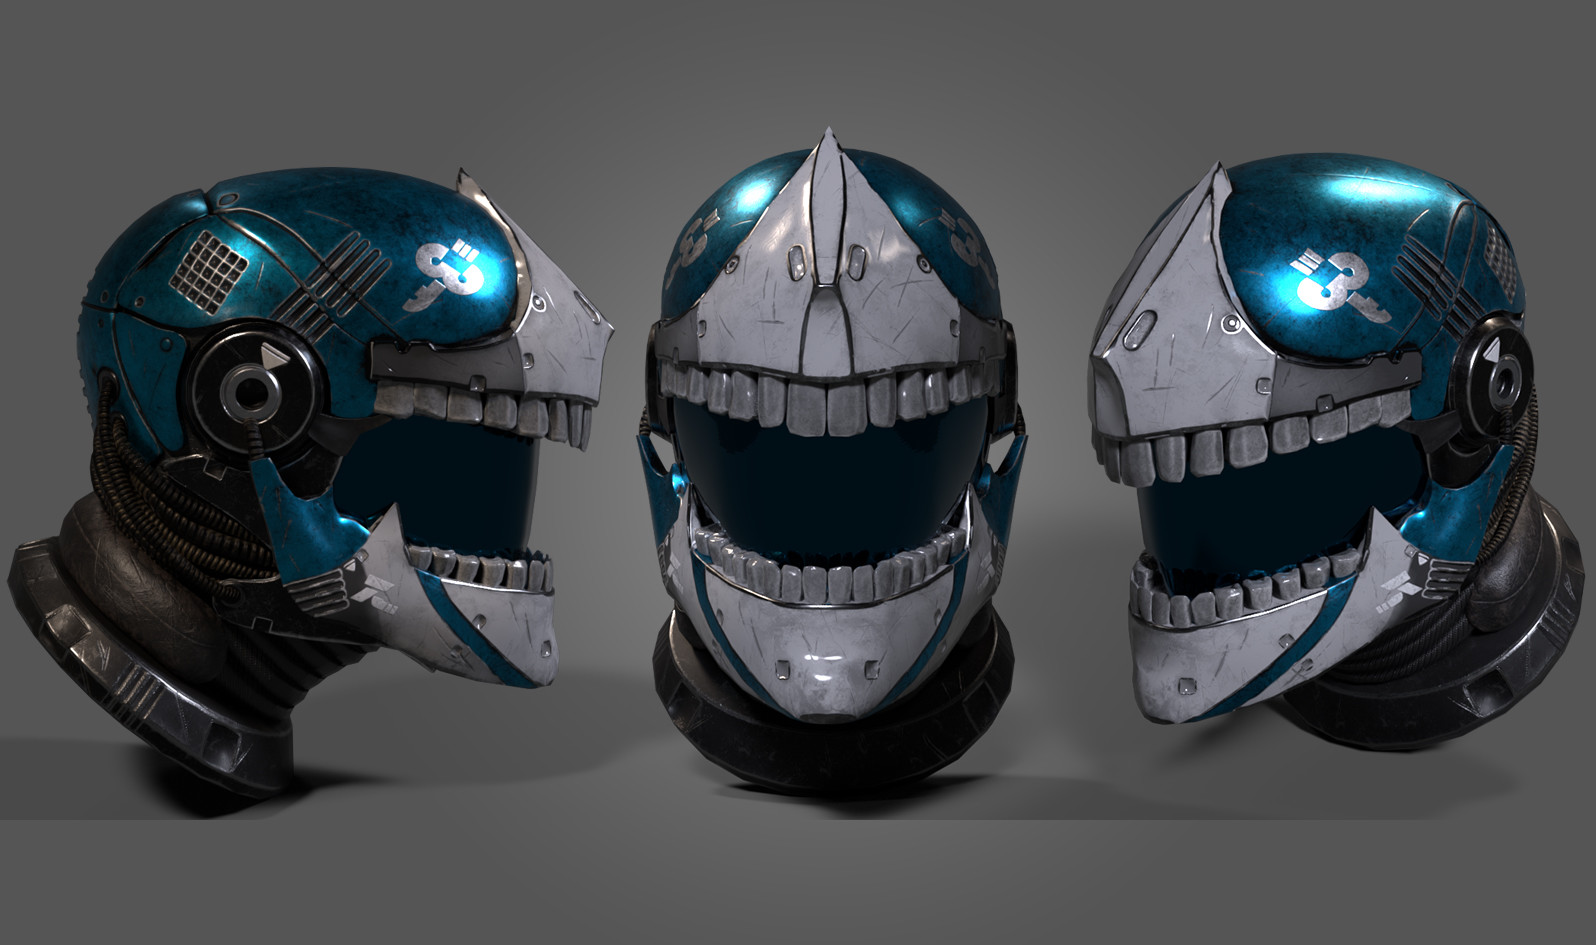 Top 10 Coolest Helmet Concepts on Artstation that could be Motorcycle